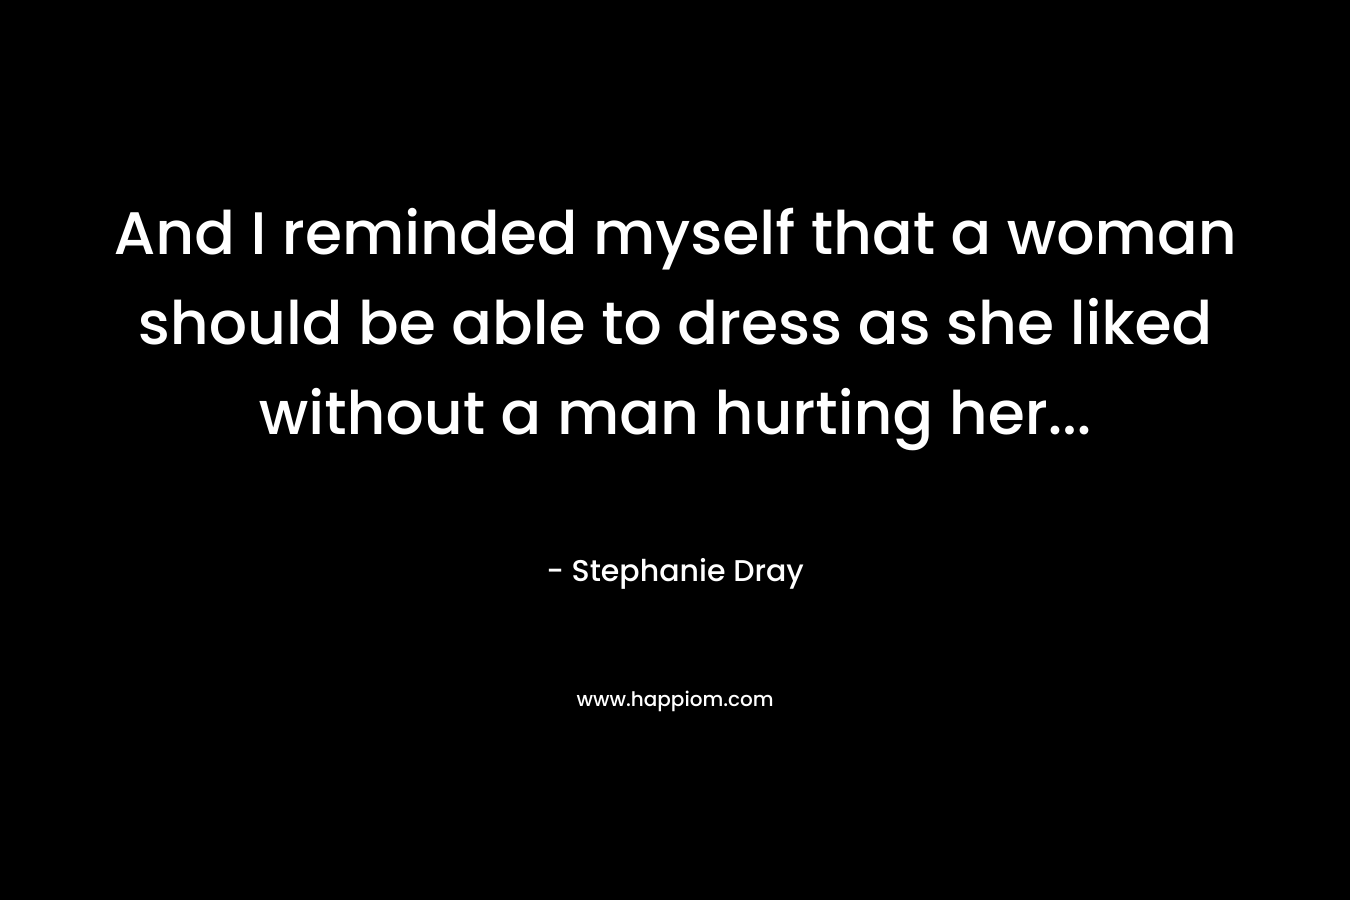 And I reminded myself that a woman should be able to dress as she liked without a man hurting her...